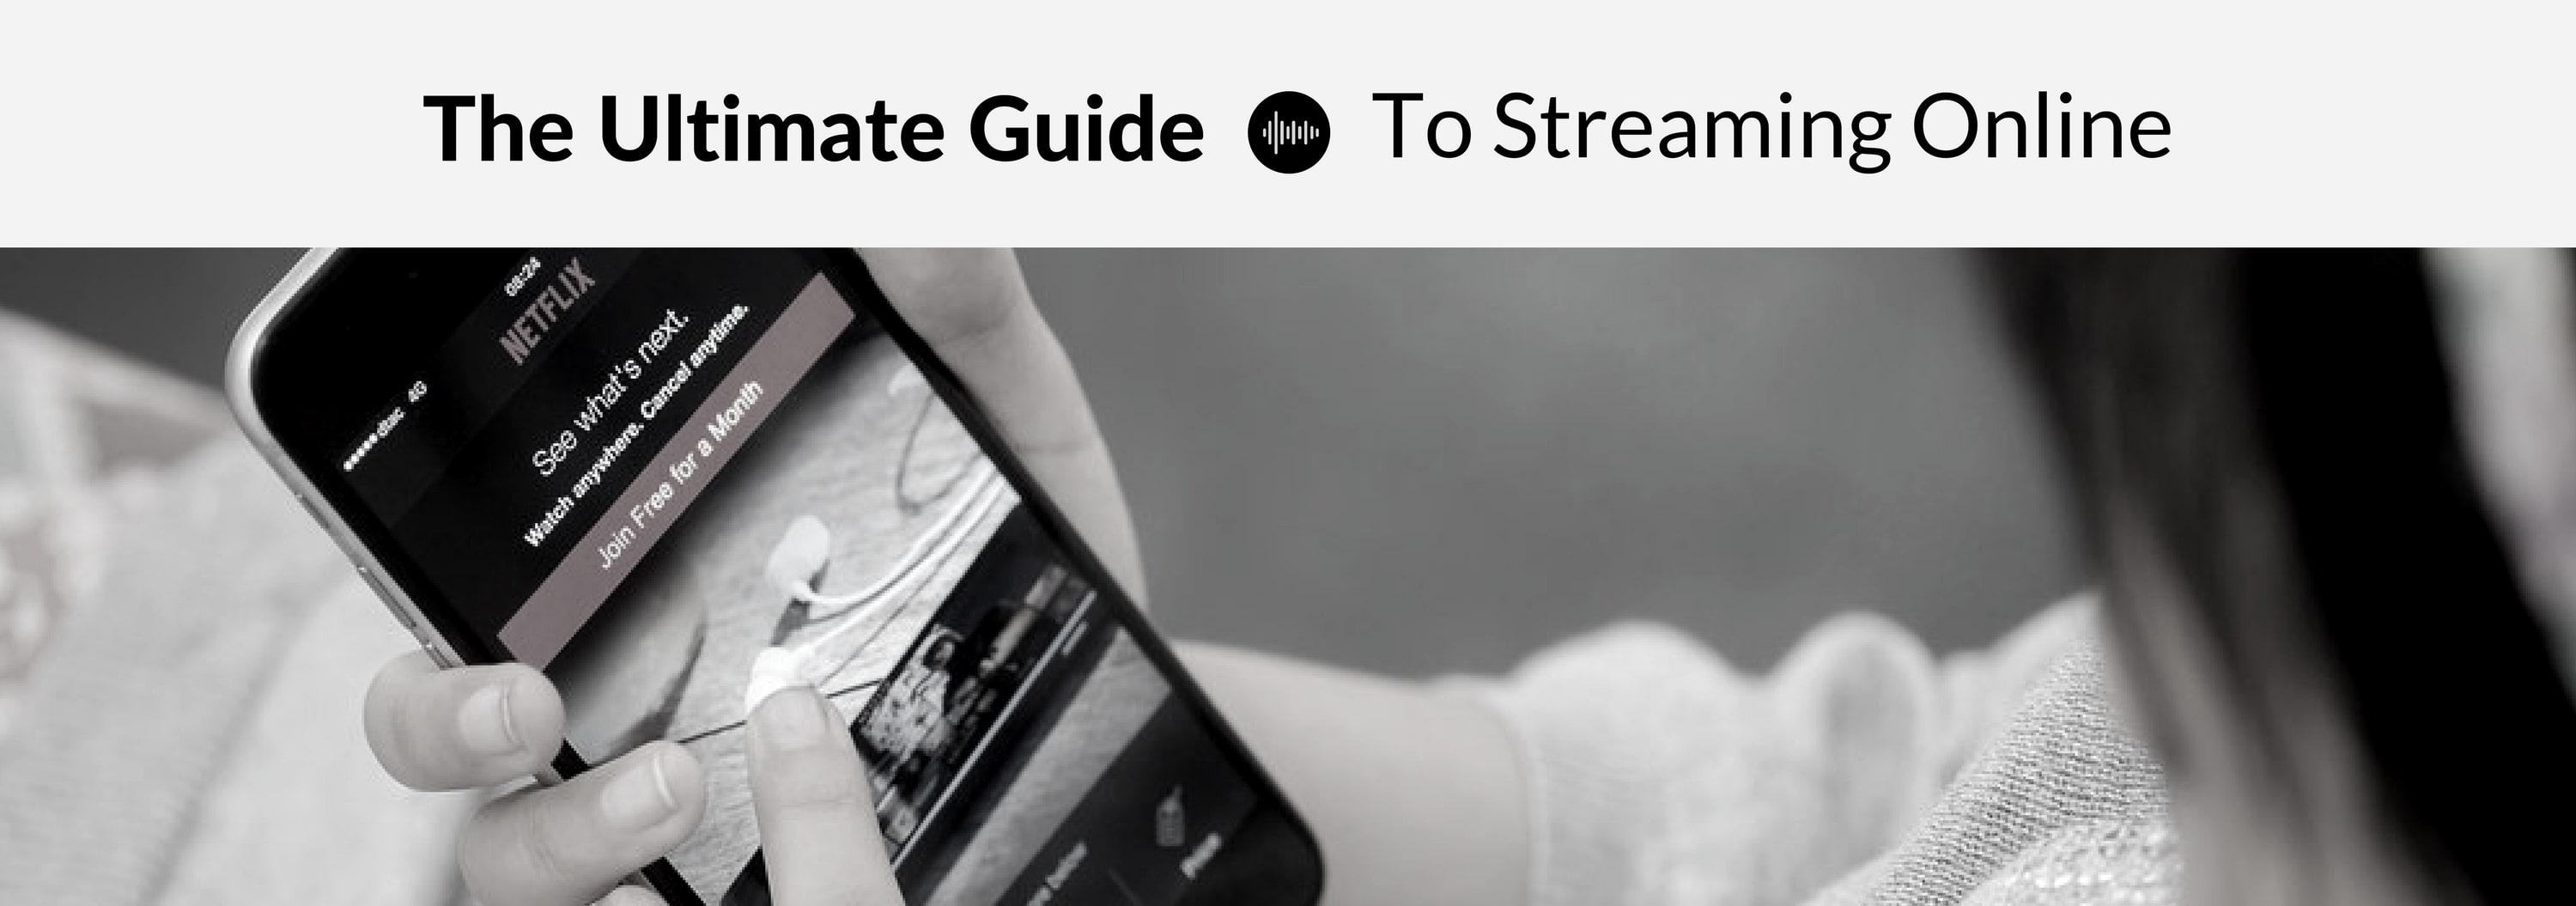 Guide to Streaming Online